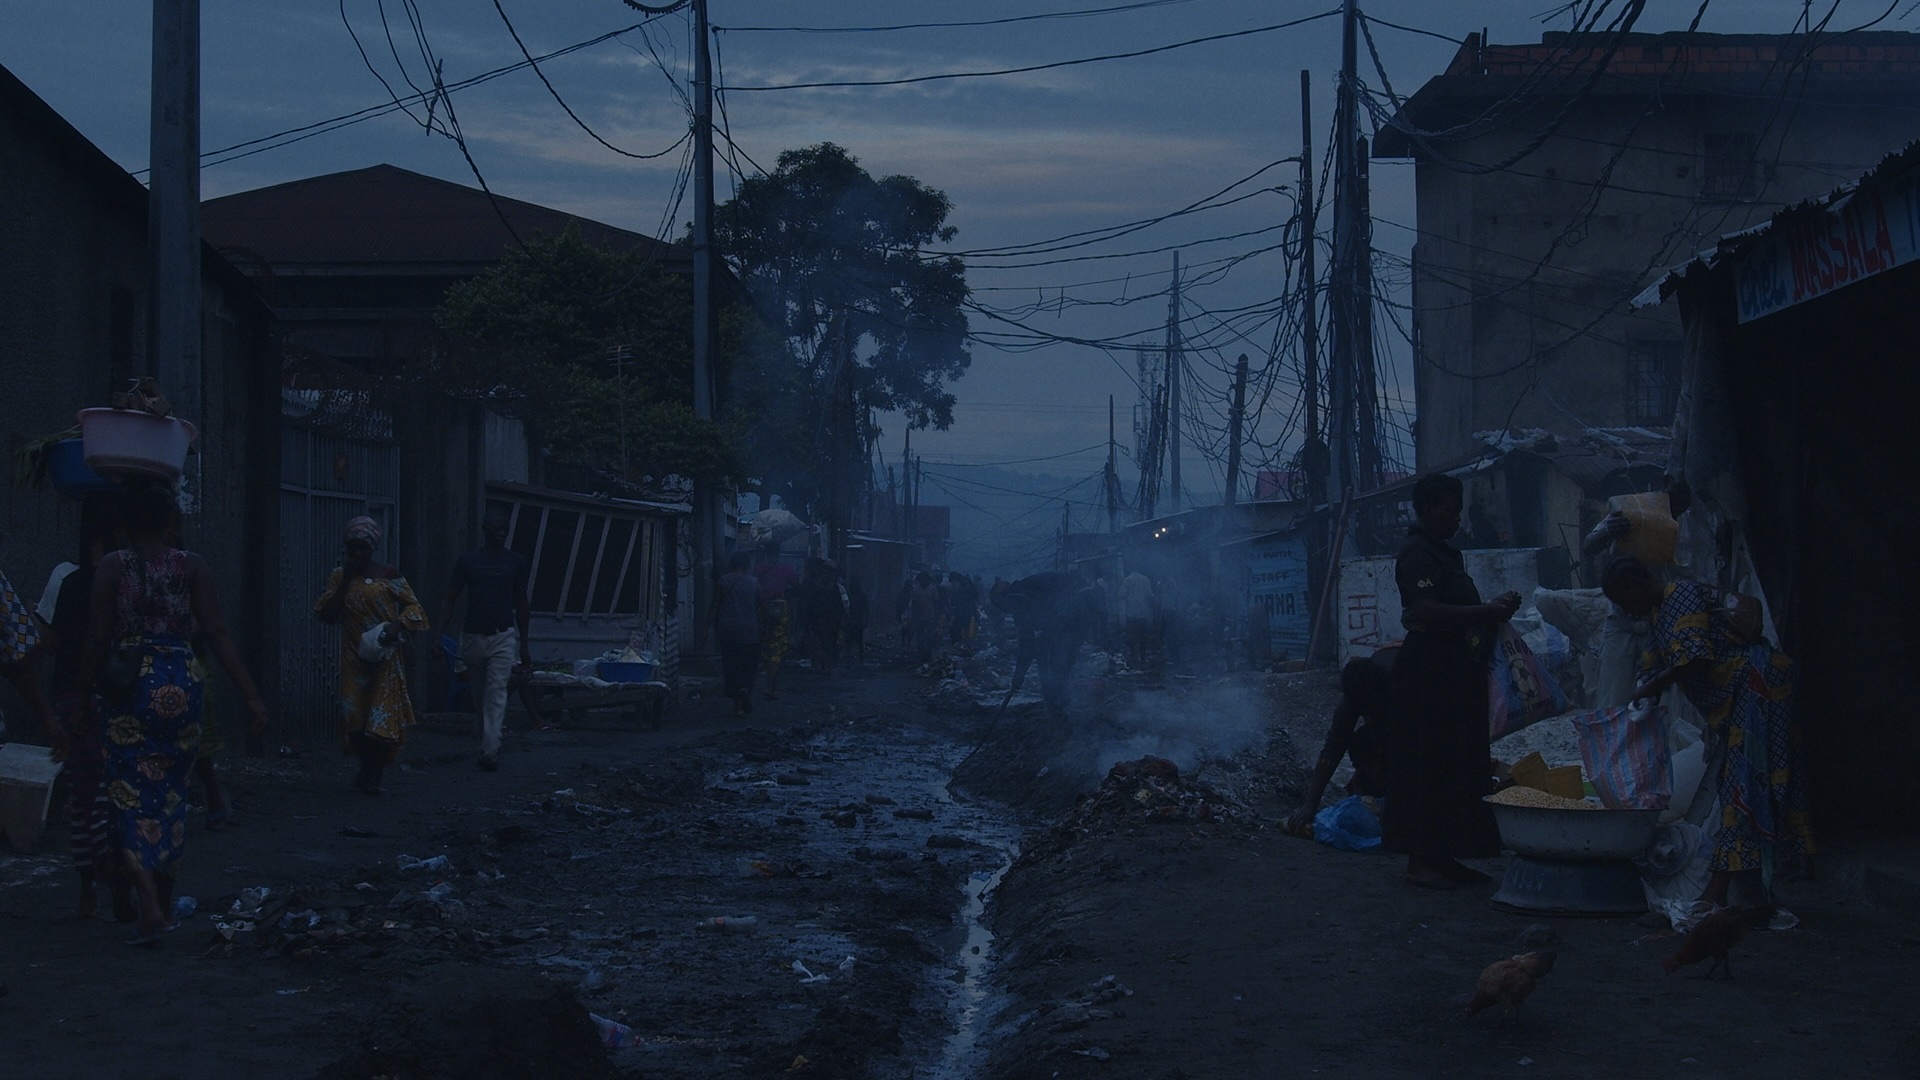 A film still from Rising Up At Night that shows a disheveled rural African neighborhood in the dawn light. There are several little shops and people wearing traditional attire conducting errands, crossing over the wet dirt and trash littered roads.